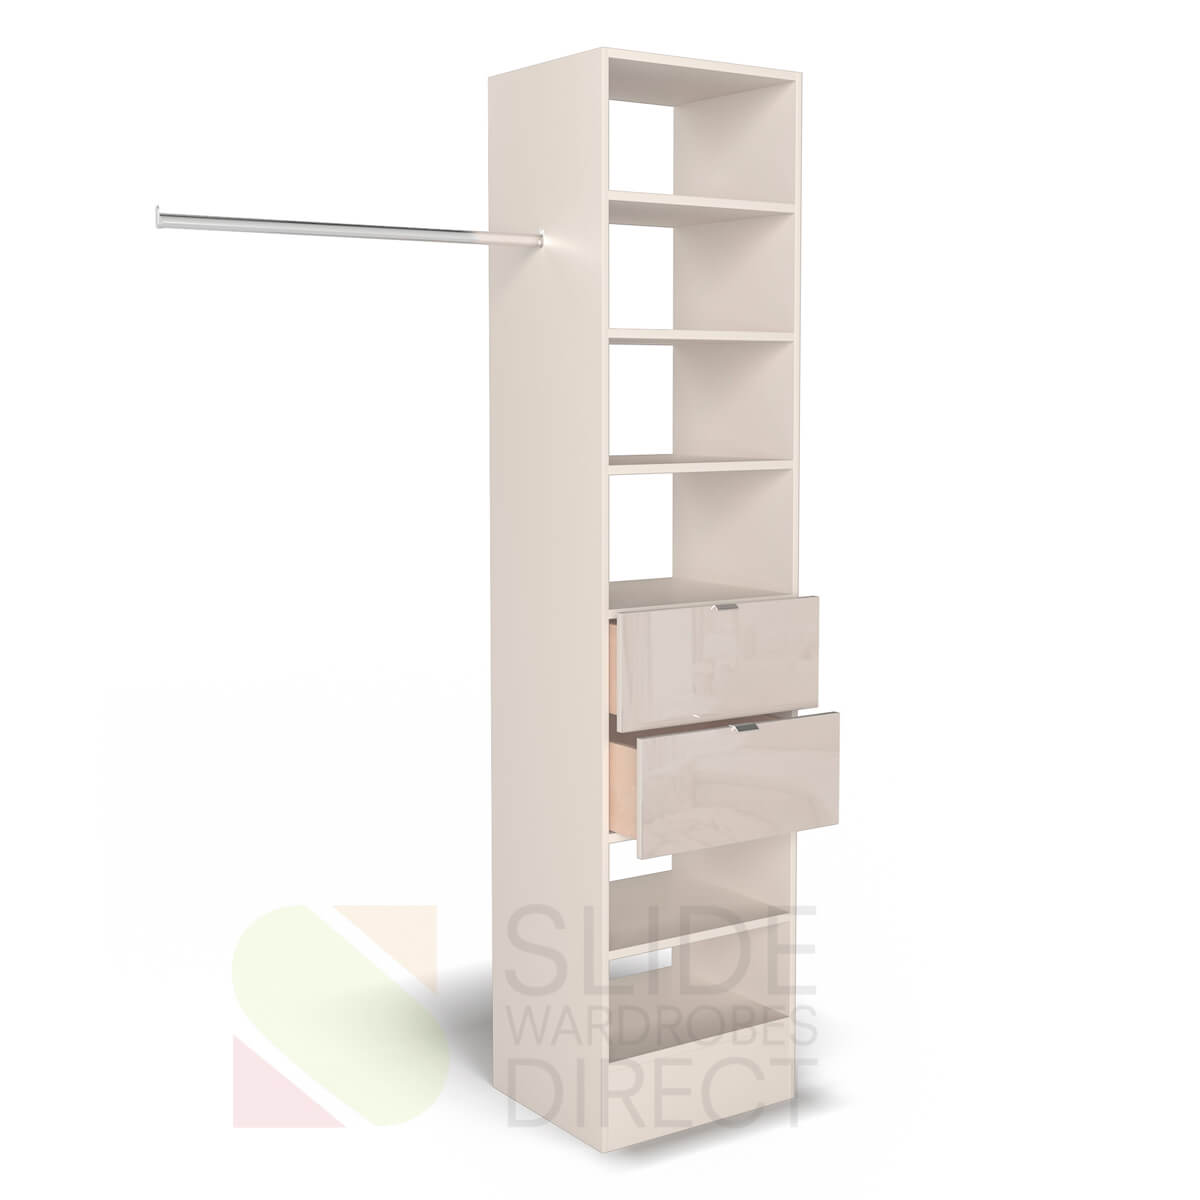 Cashmere tower with Cashmere glass drawer fronts